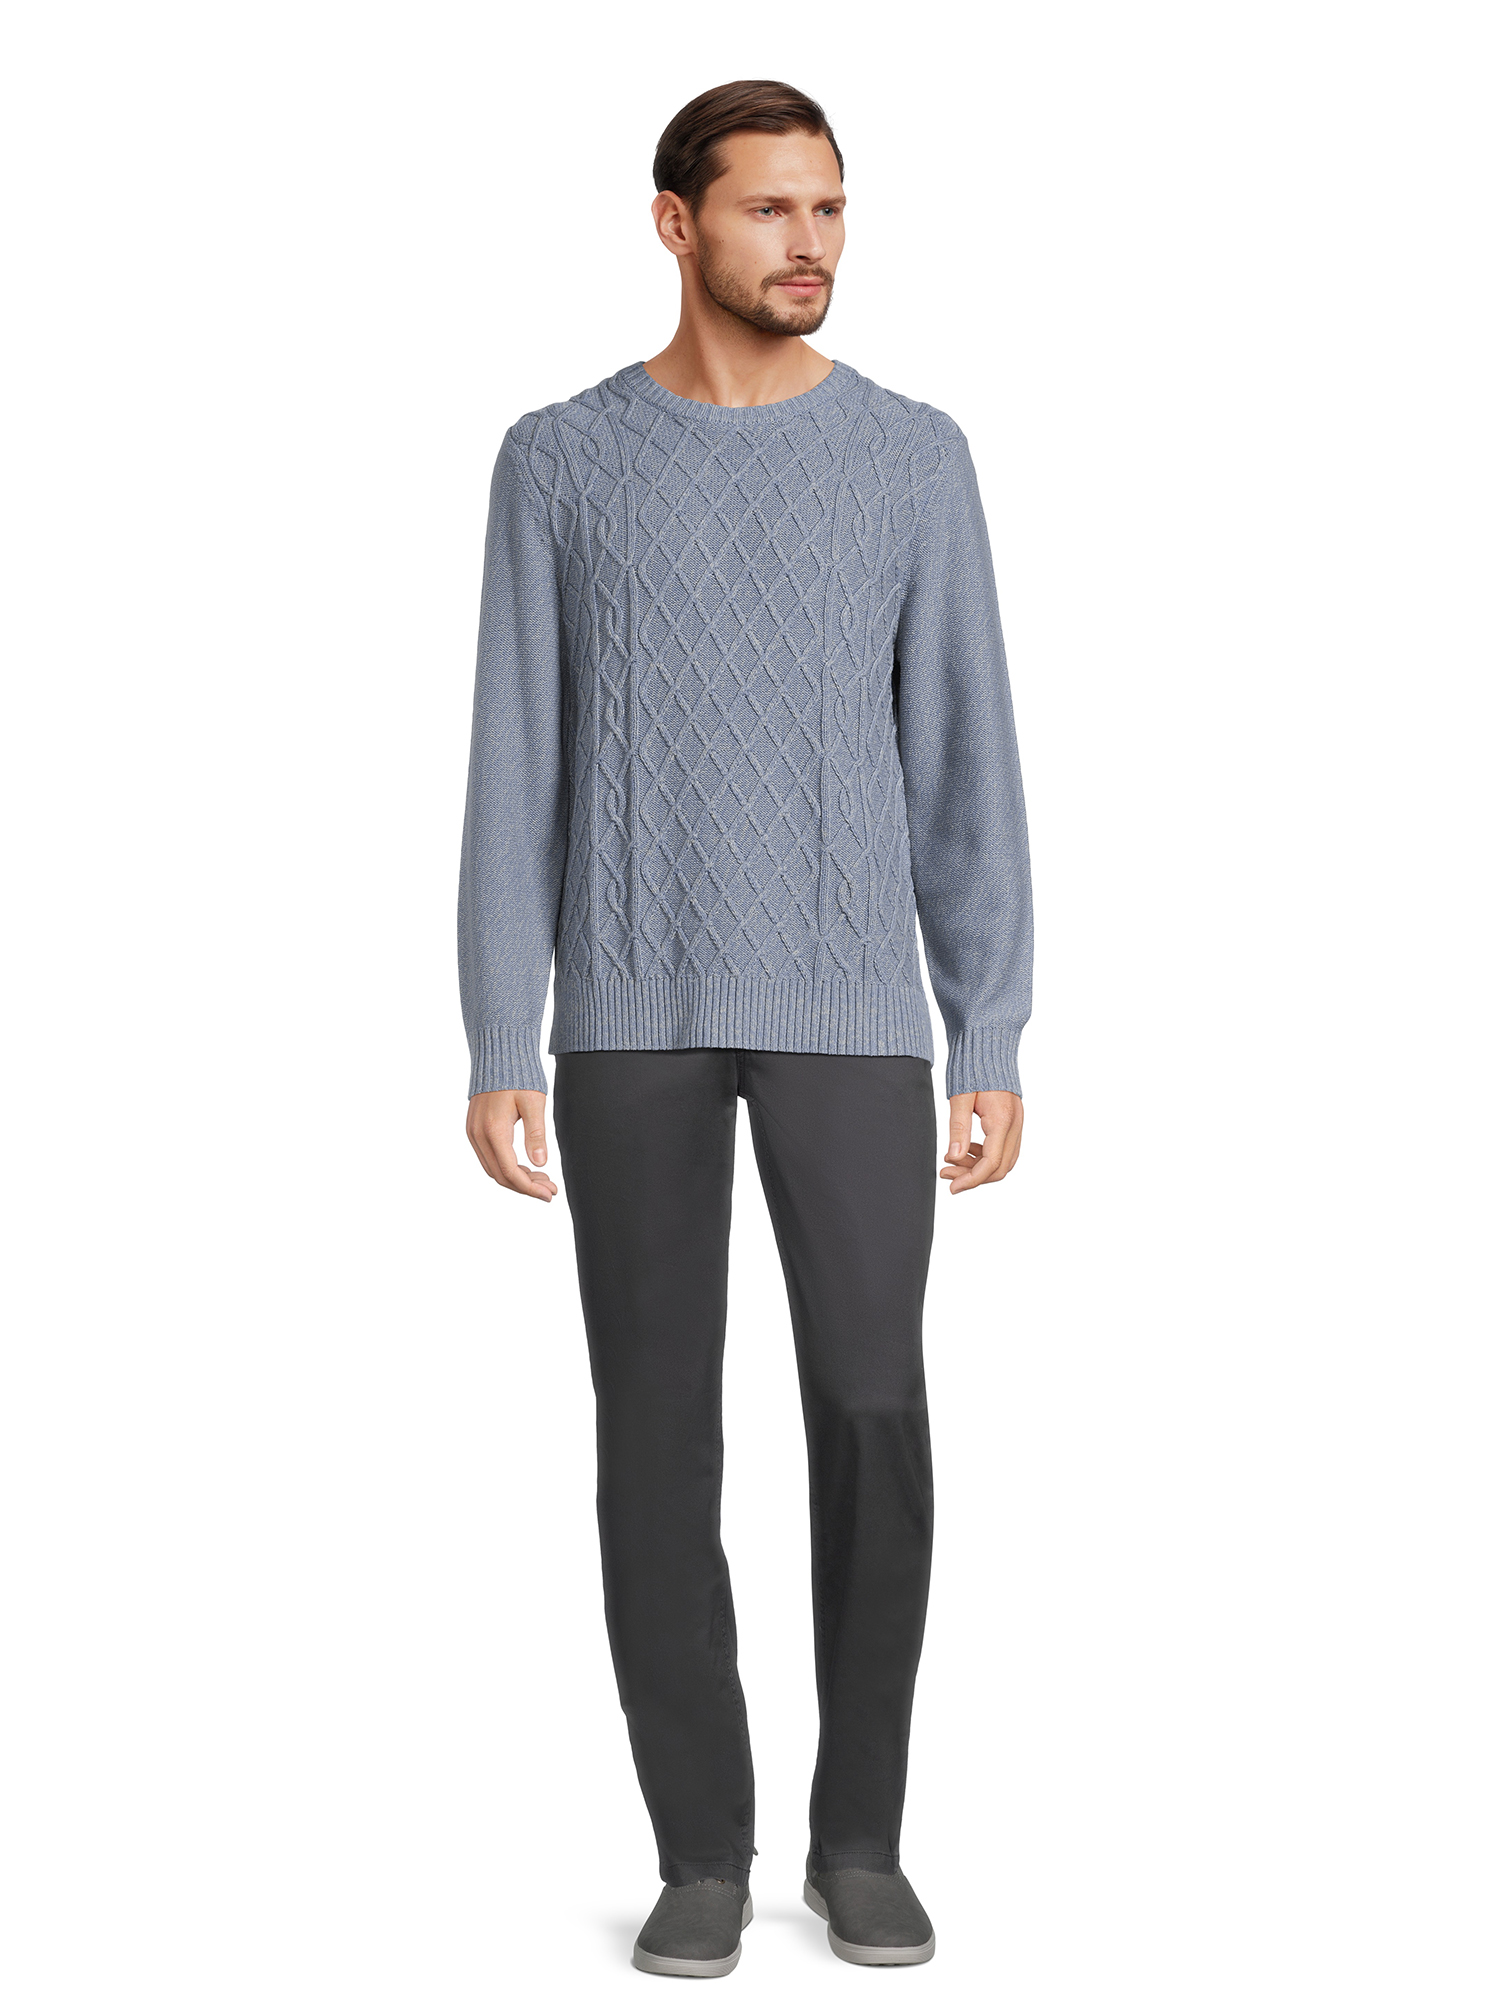 George Men's Marled Sweater with Long Sleeves, Sizes S-3XL - image 2 of 5